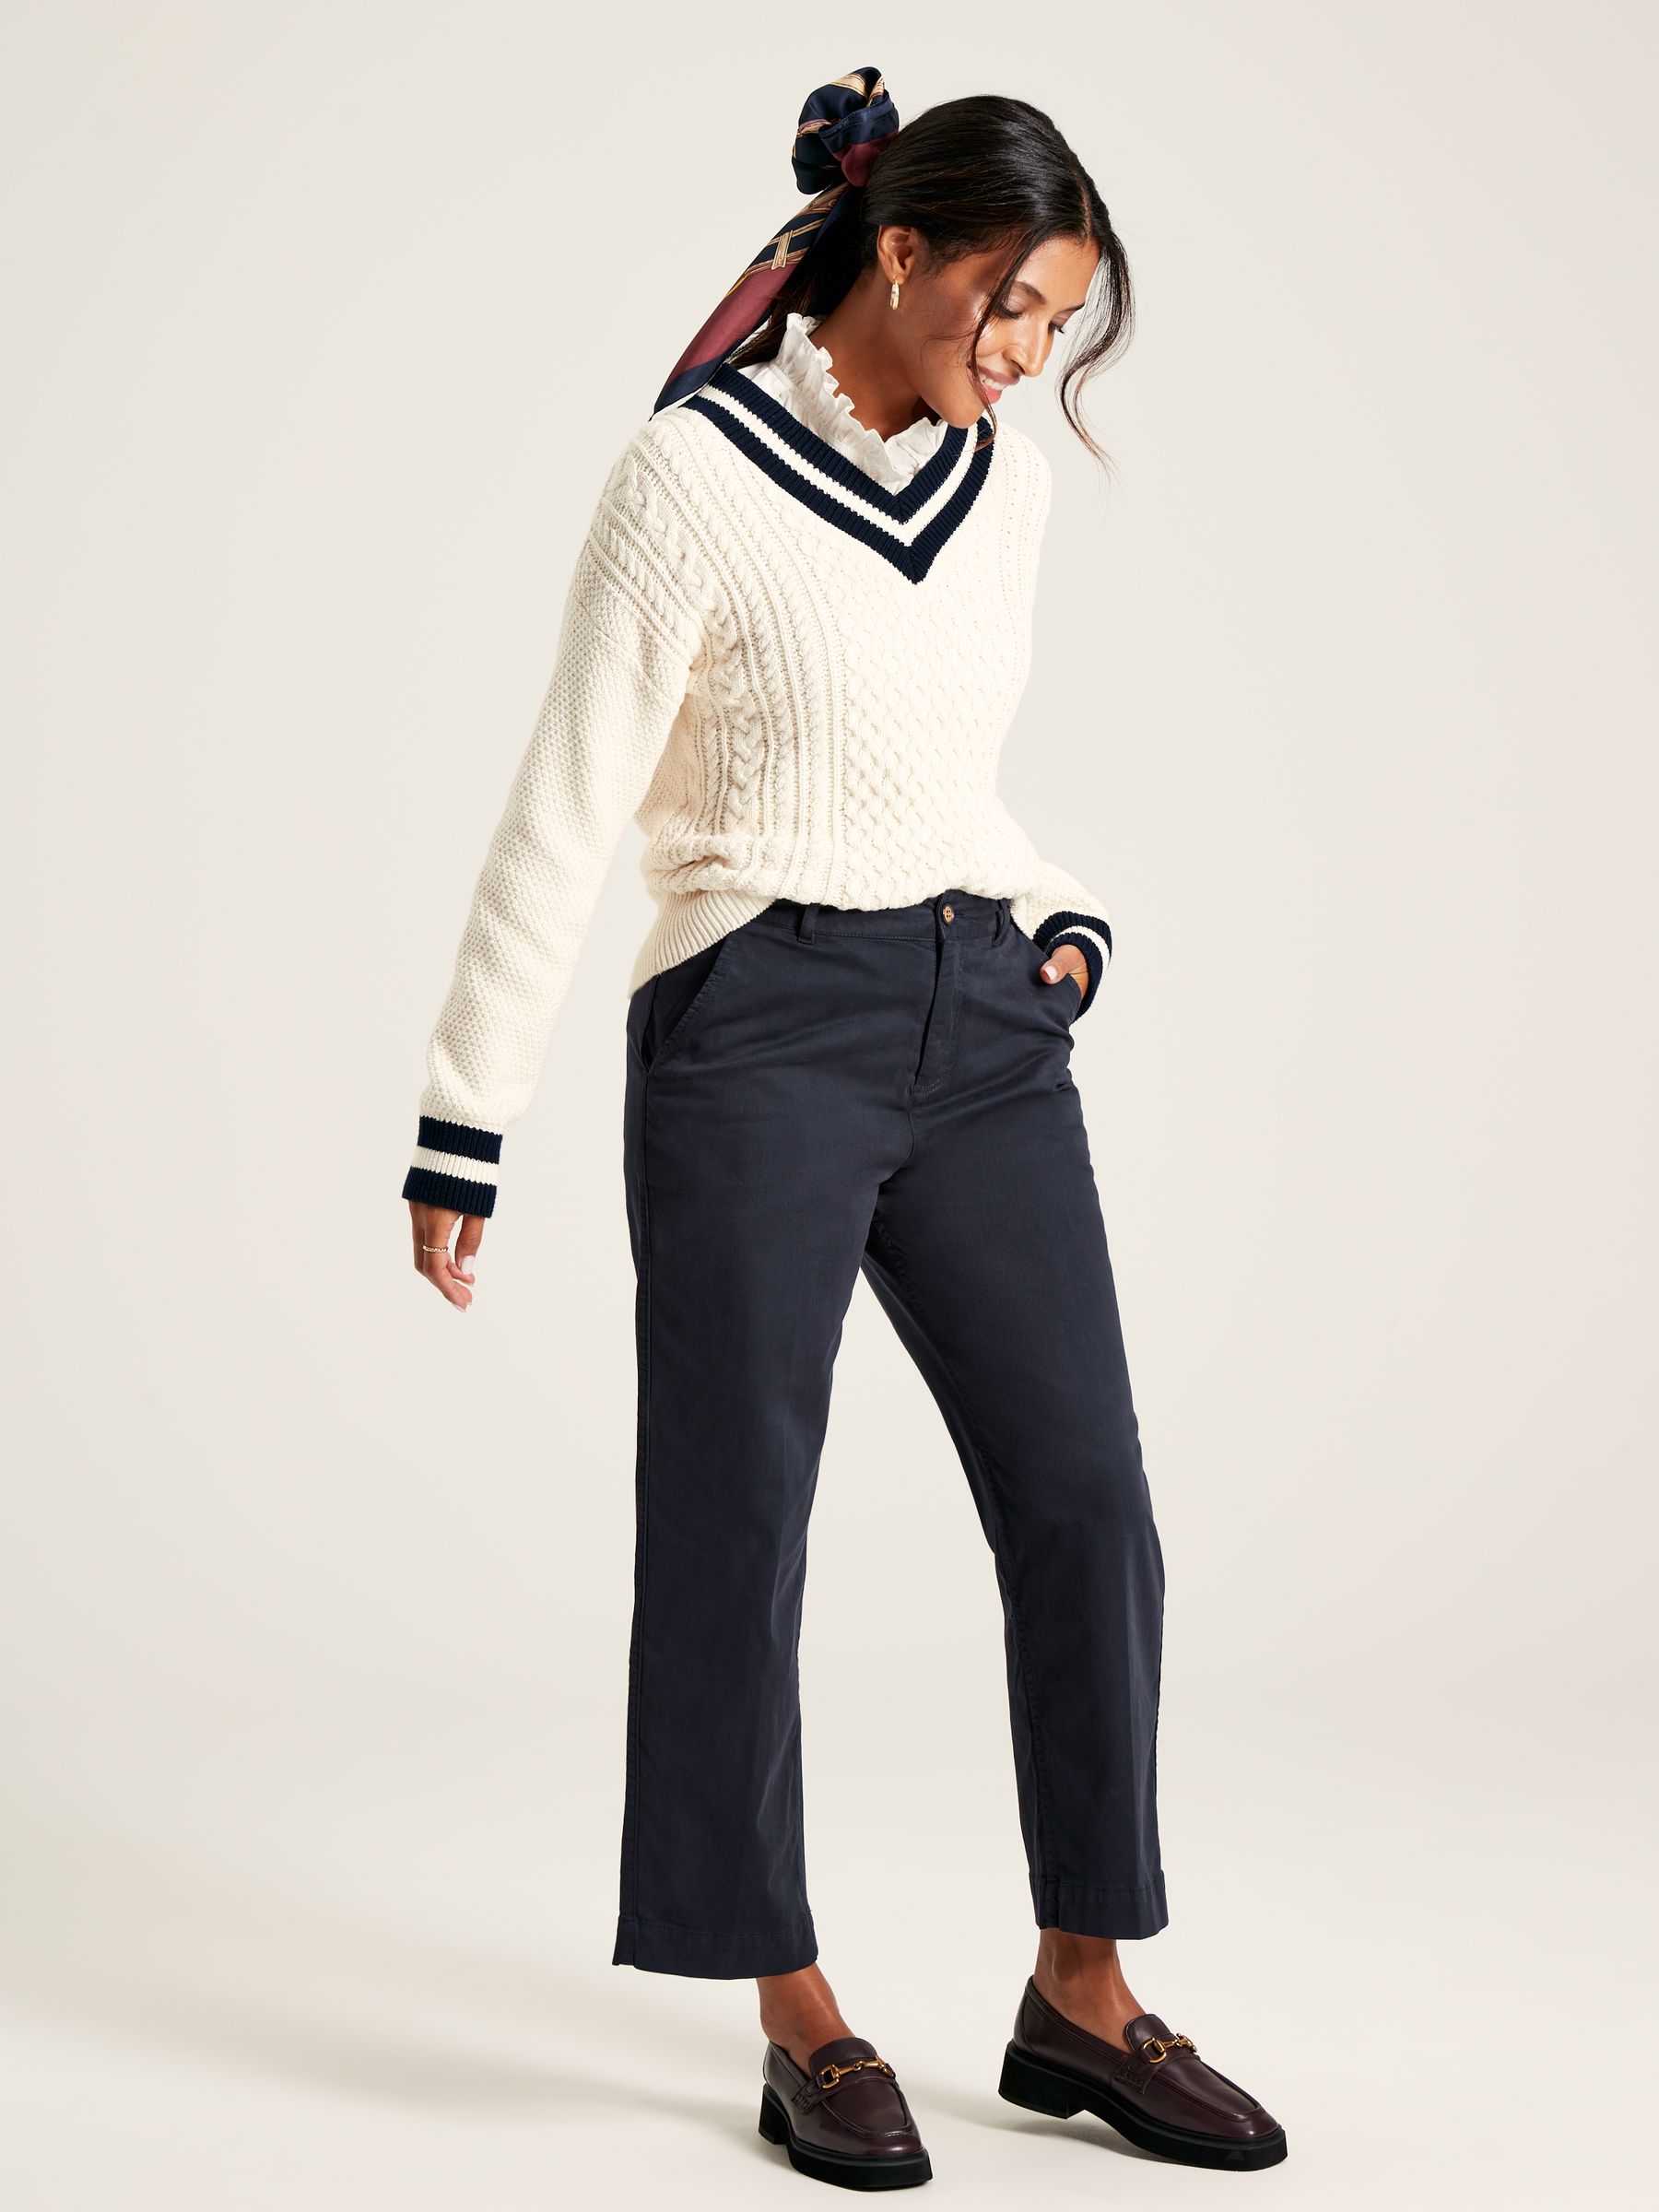 Buy Cedar Navy Straight Leg Chinos from the Joules online shop